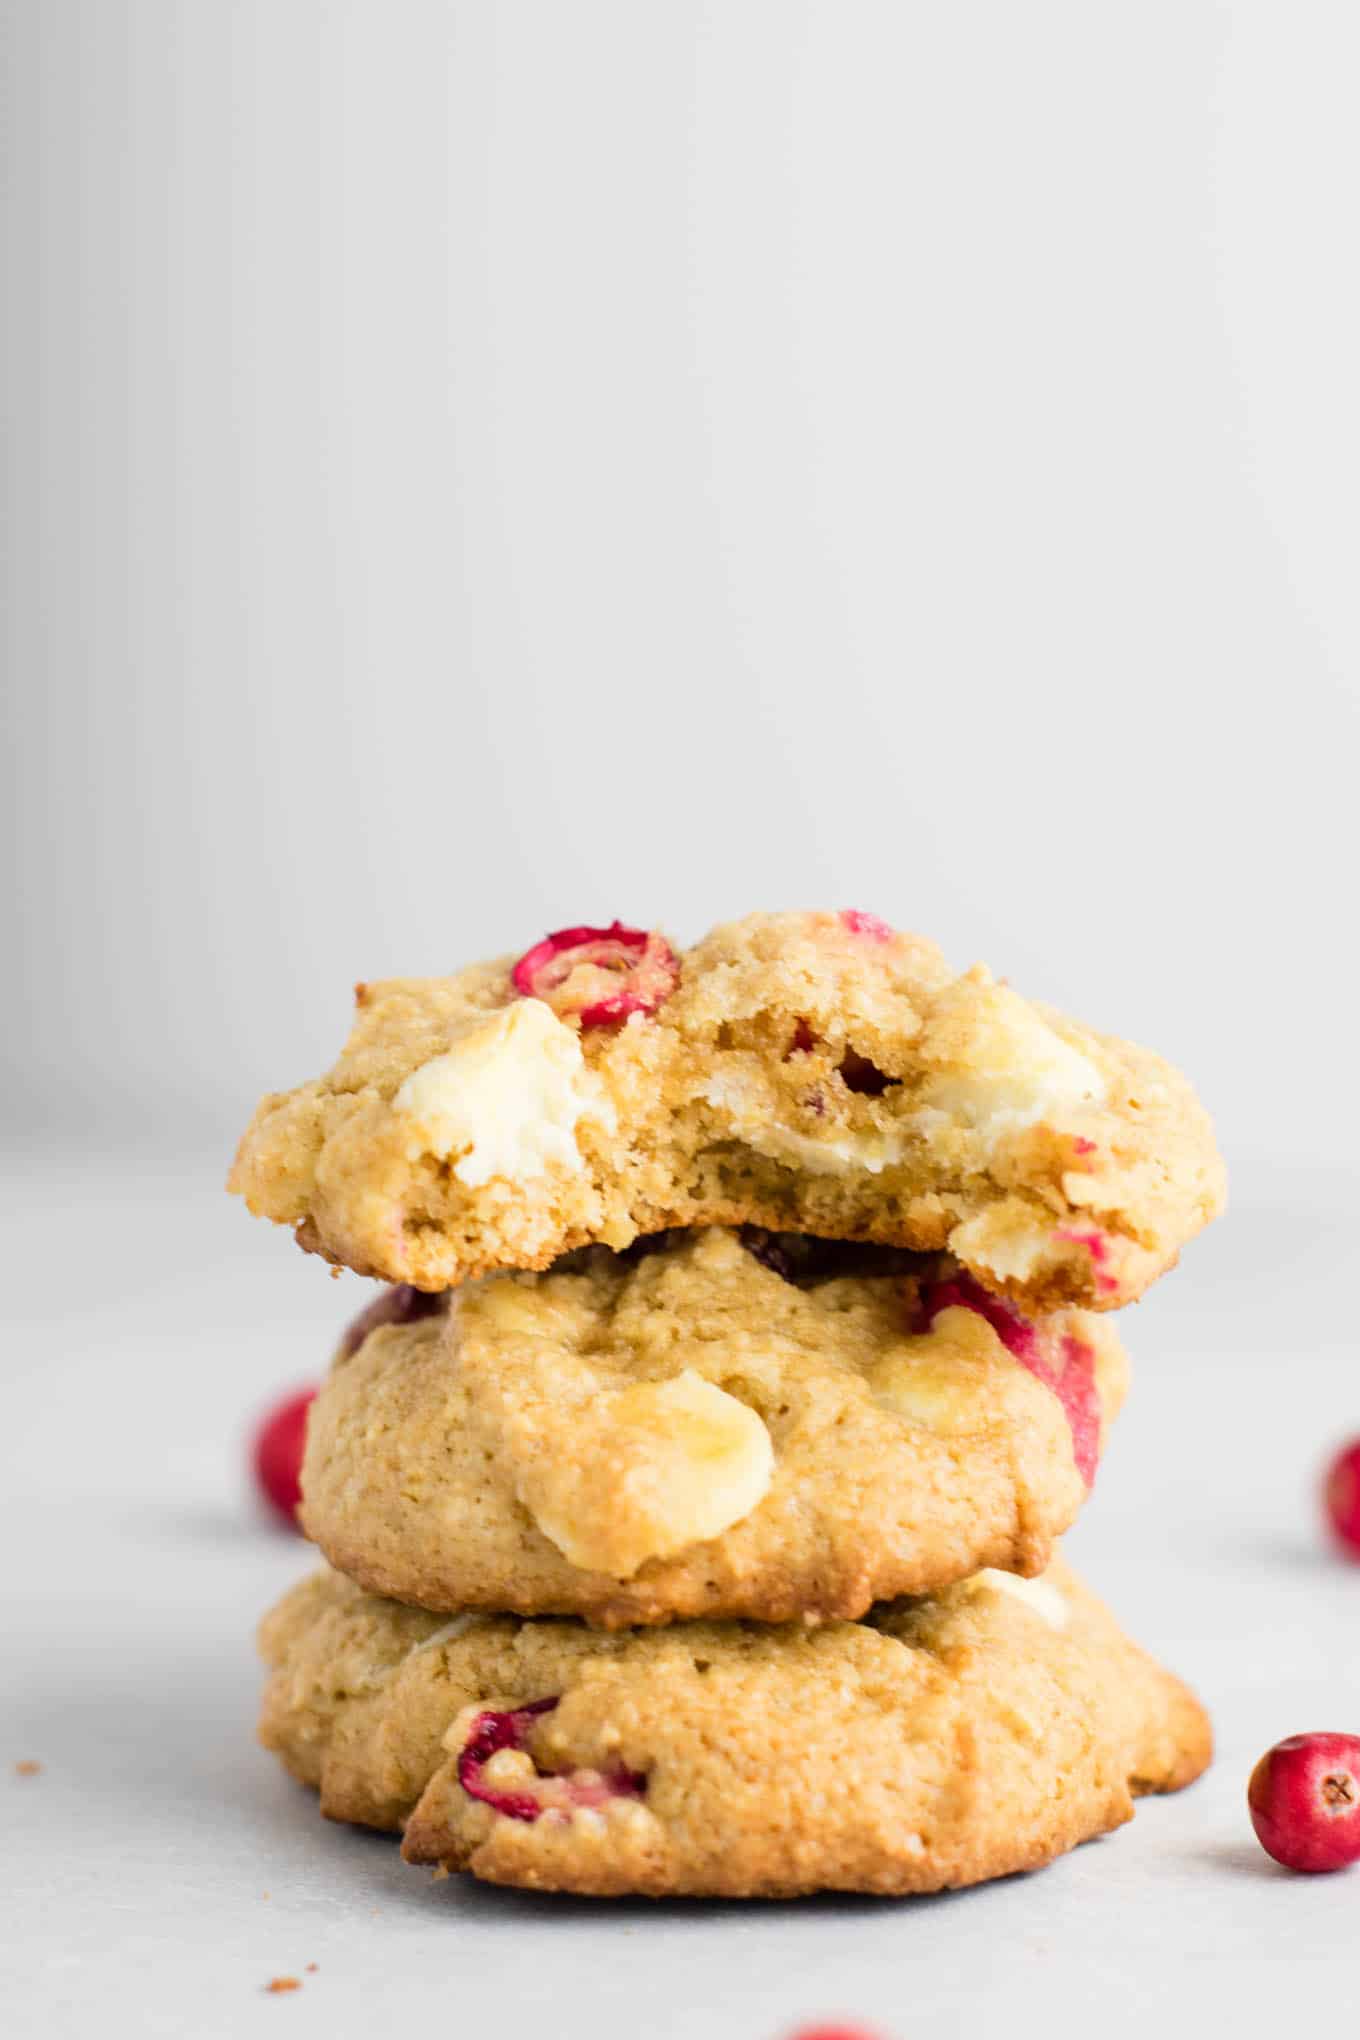 fresh cranberry recipes - Healthier cranberry white chocolate chip cookies recipe with fresh cranberries. The perfect seasonal Christmas cookie bursting with flavor! #cranberry #whitechocolate #cookies #christmas #dessert